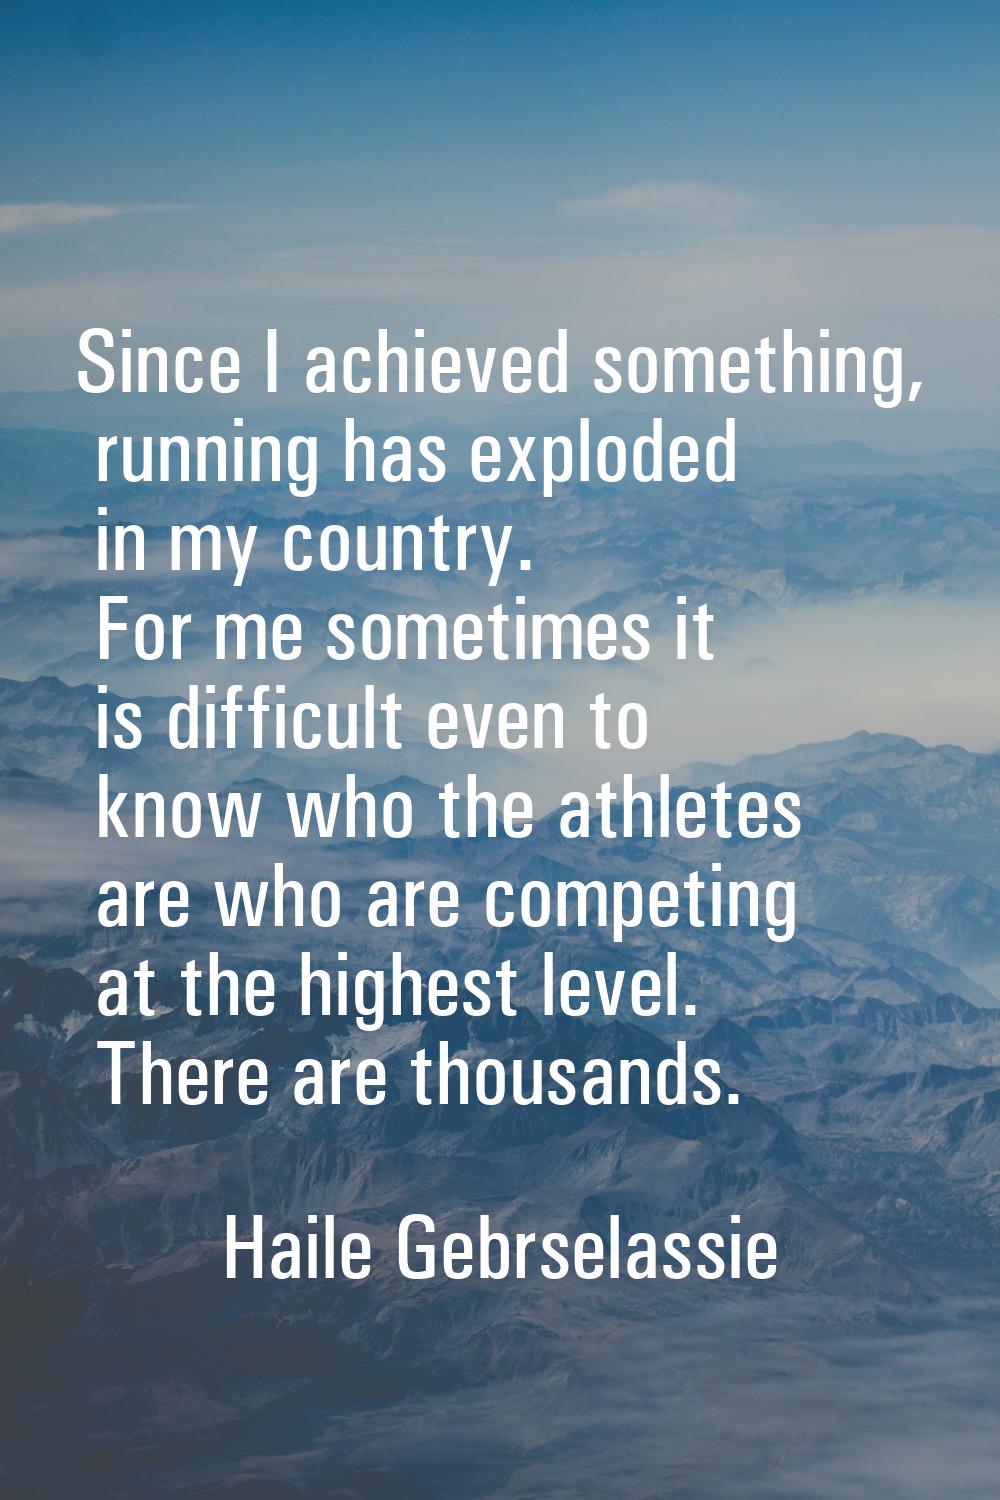 Since I achieved something, running has exploded in my country. For me sometimes it is difficult ev